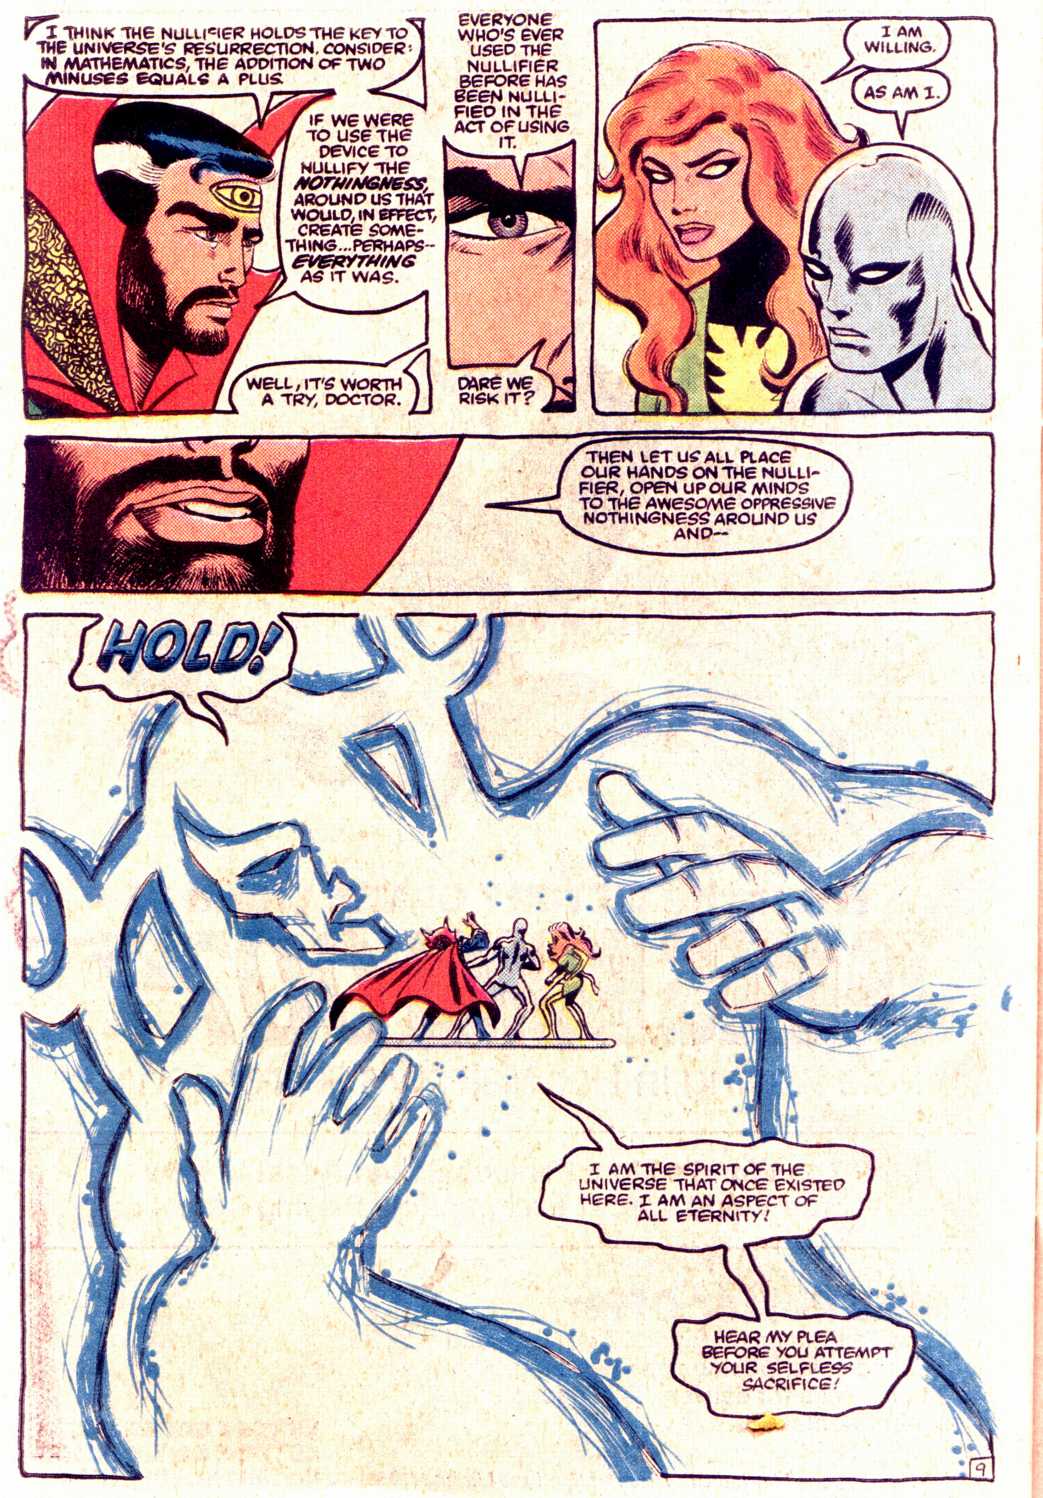 What If? (1977) issue 43 - Conan the Barbarian were stranded in the 20th century - Page 38